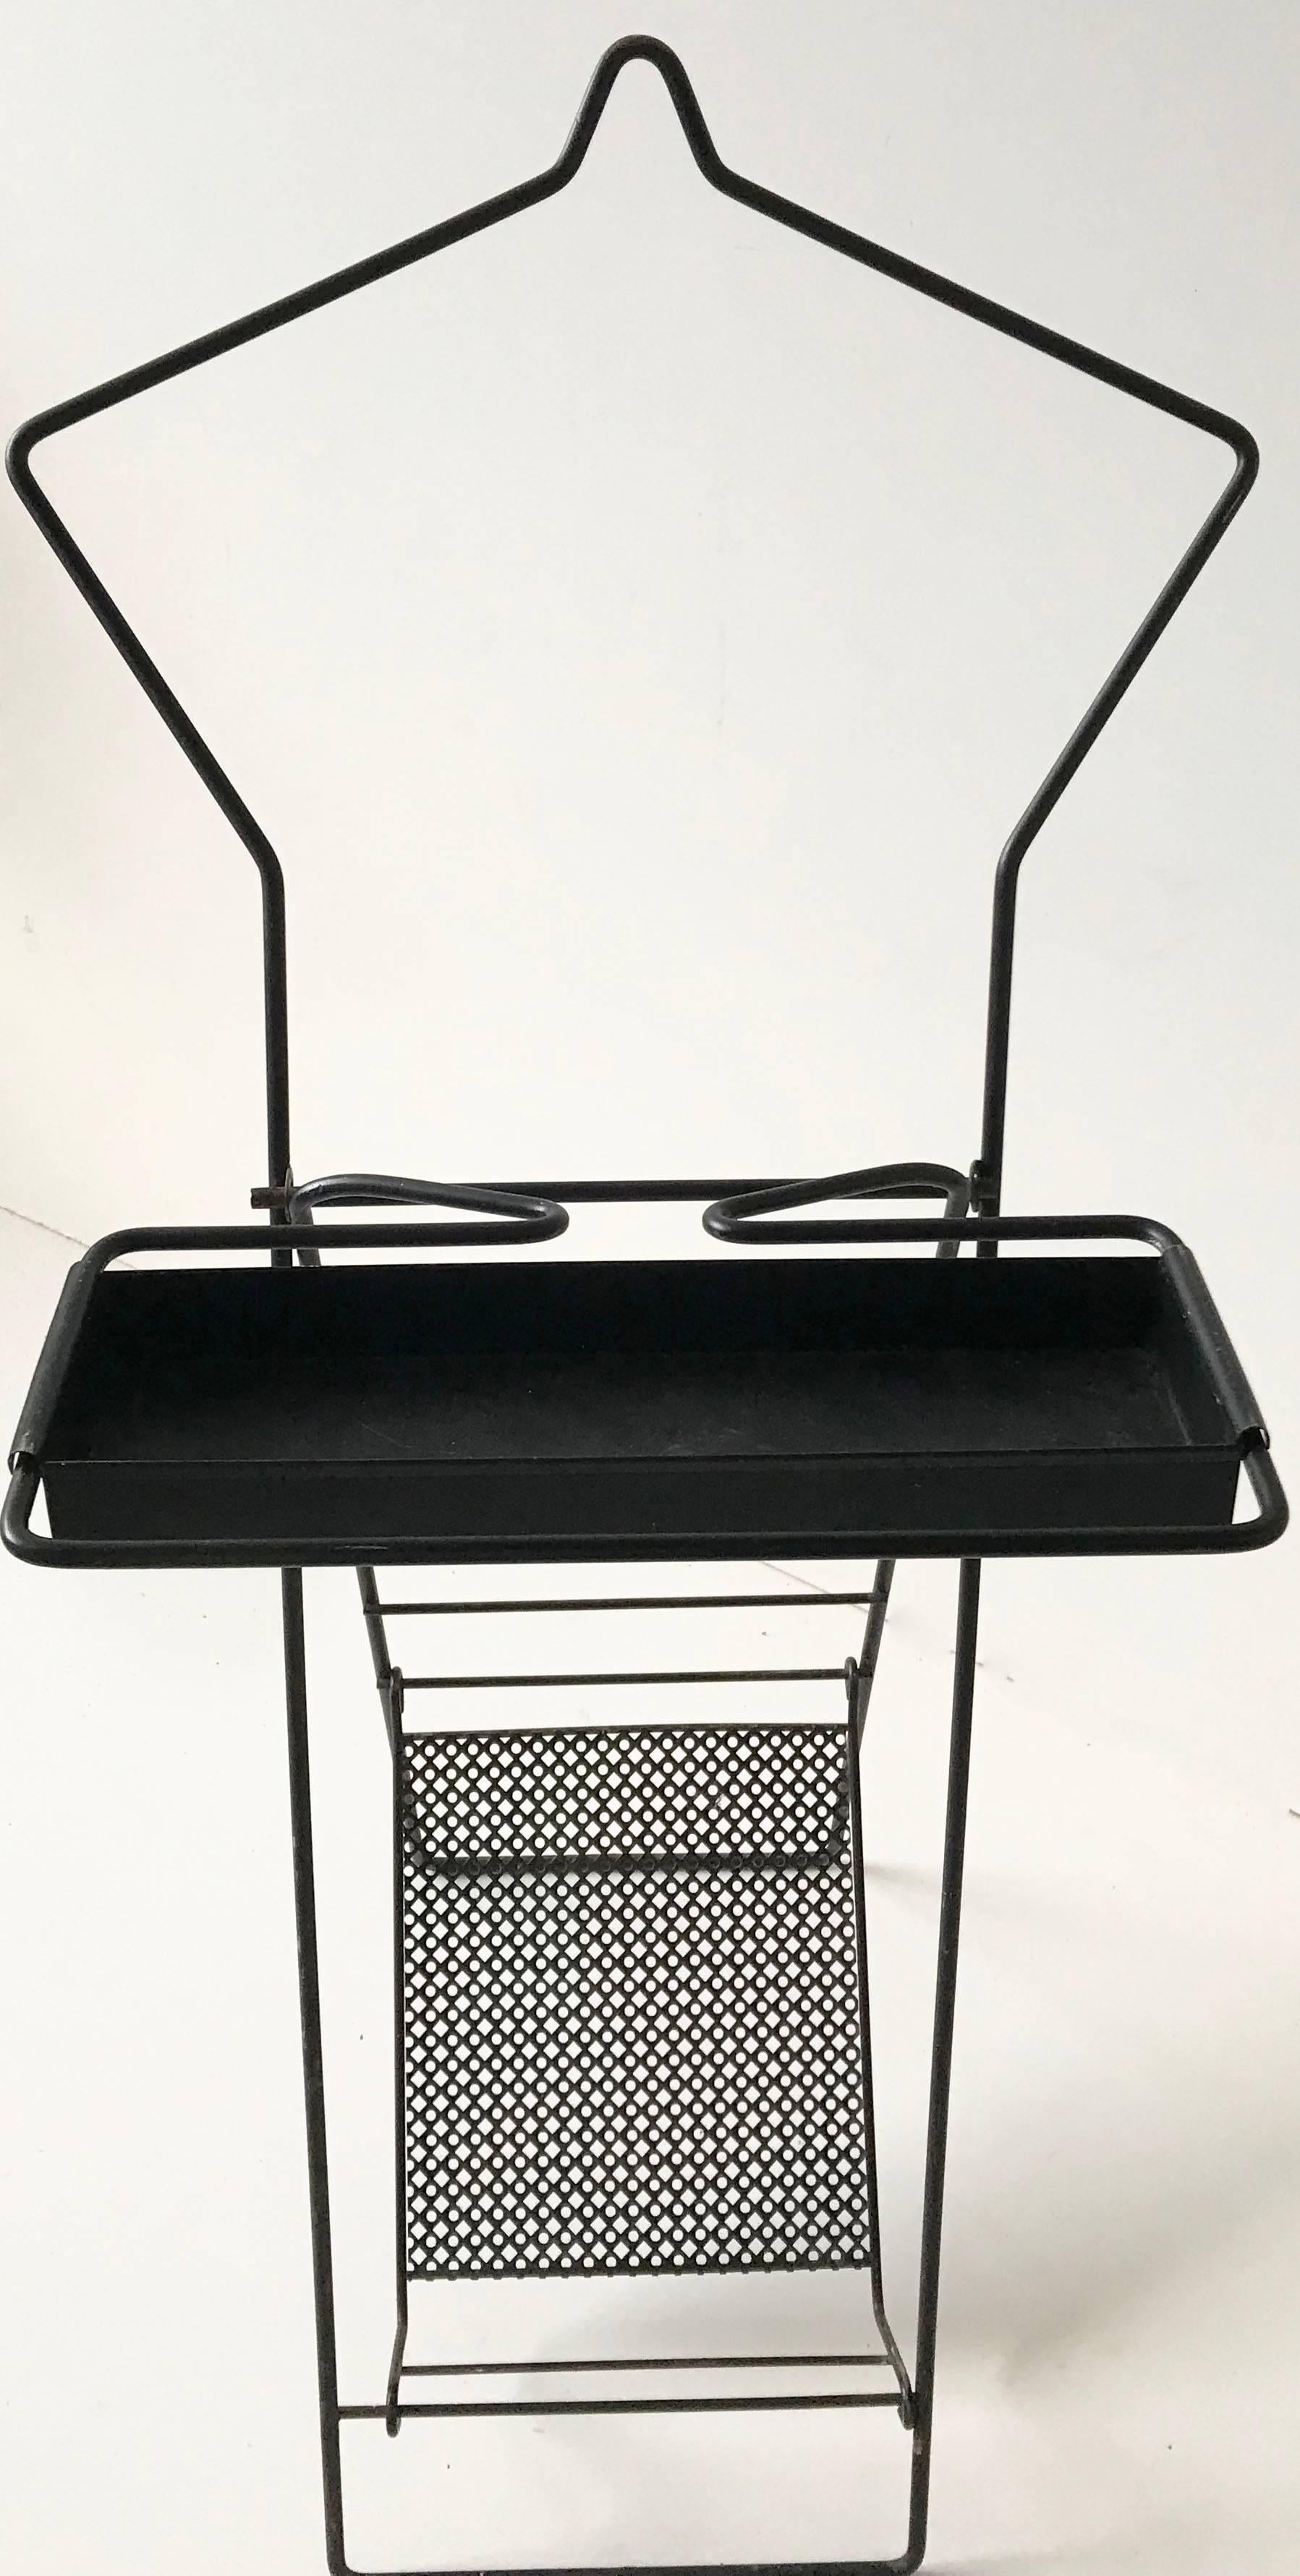 Exceptional pair of fold-able valet, coat racks manufactured for Pilastro in the Netherlands between 1955 and 1960. 
Made from enameled metal.
Two valets: one white in the original condition, one black in very good condition.